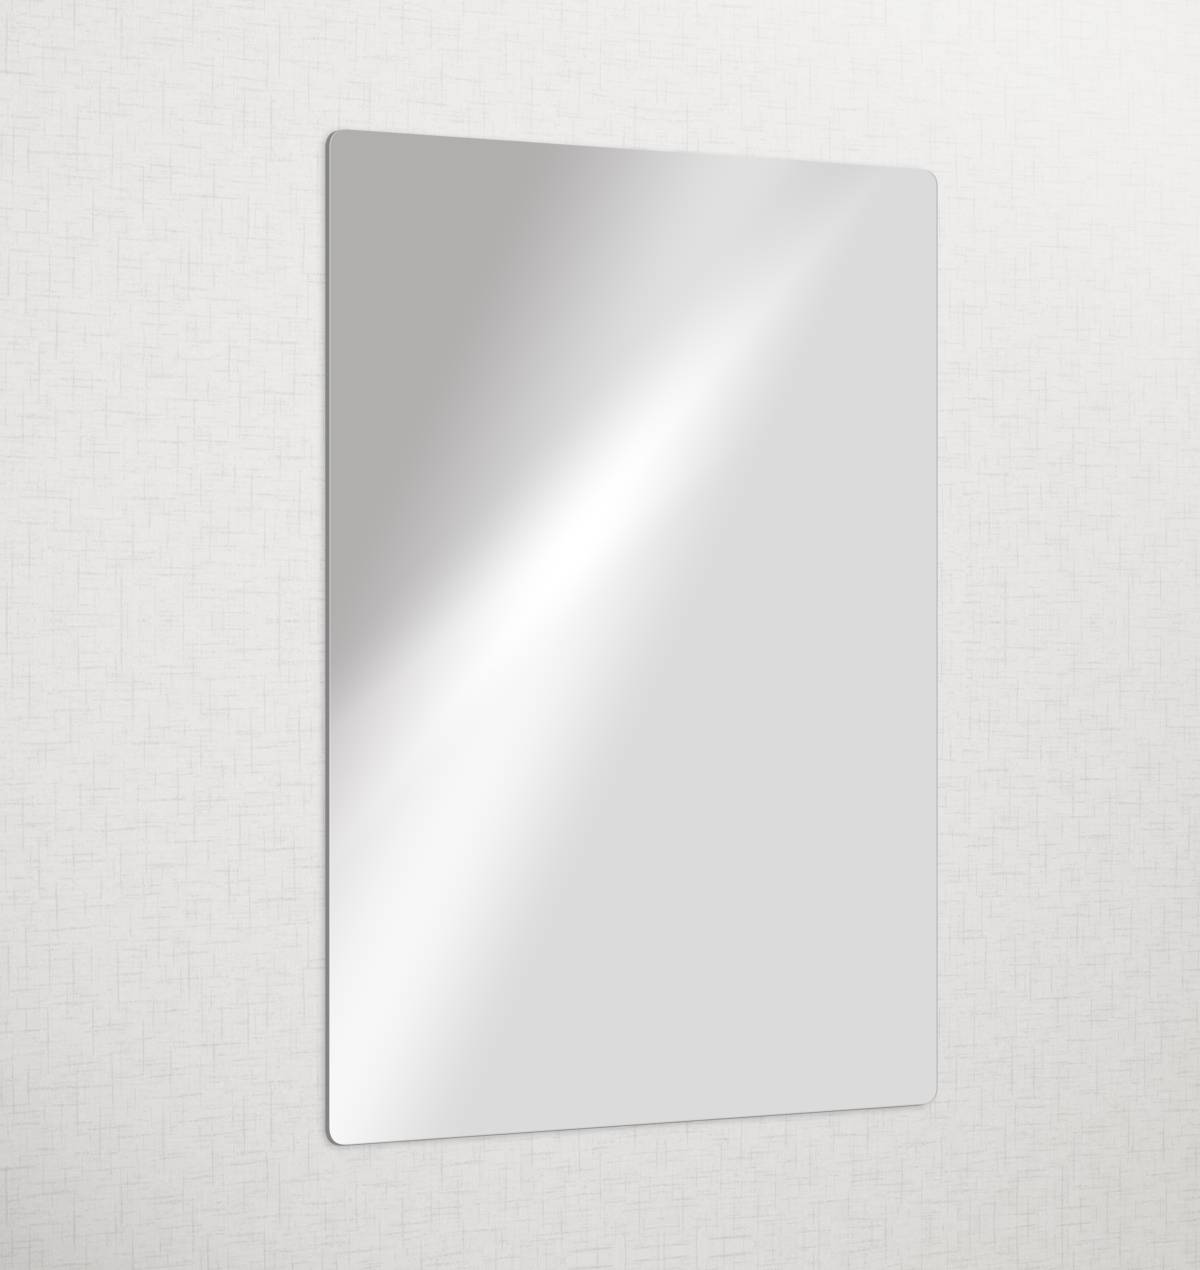 Acrylic Safety Mirrors